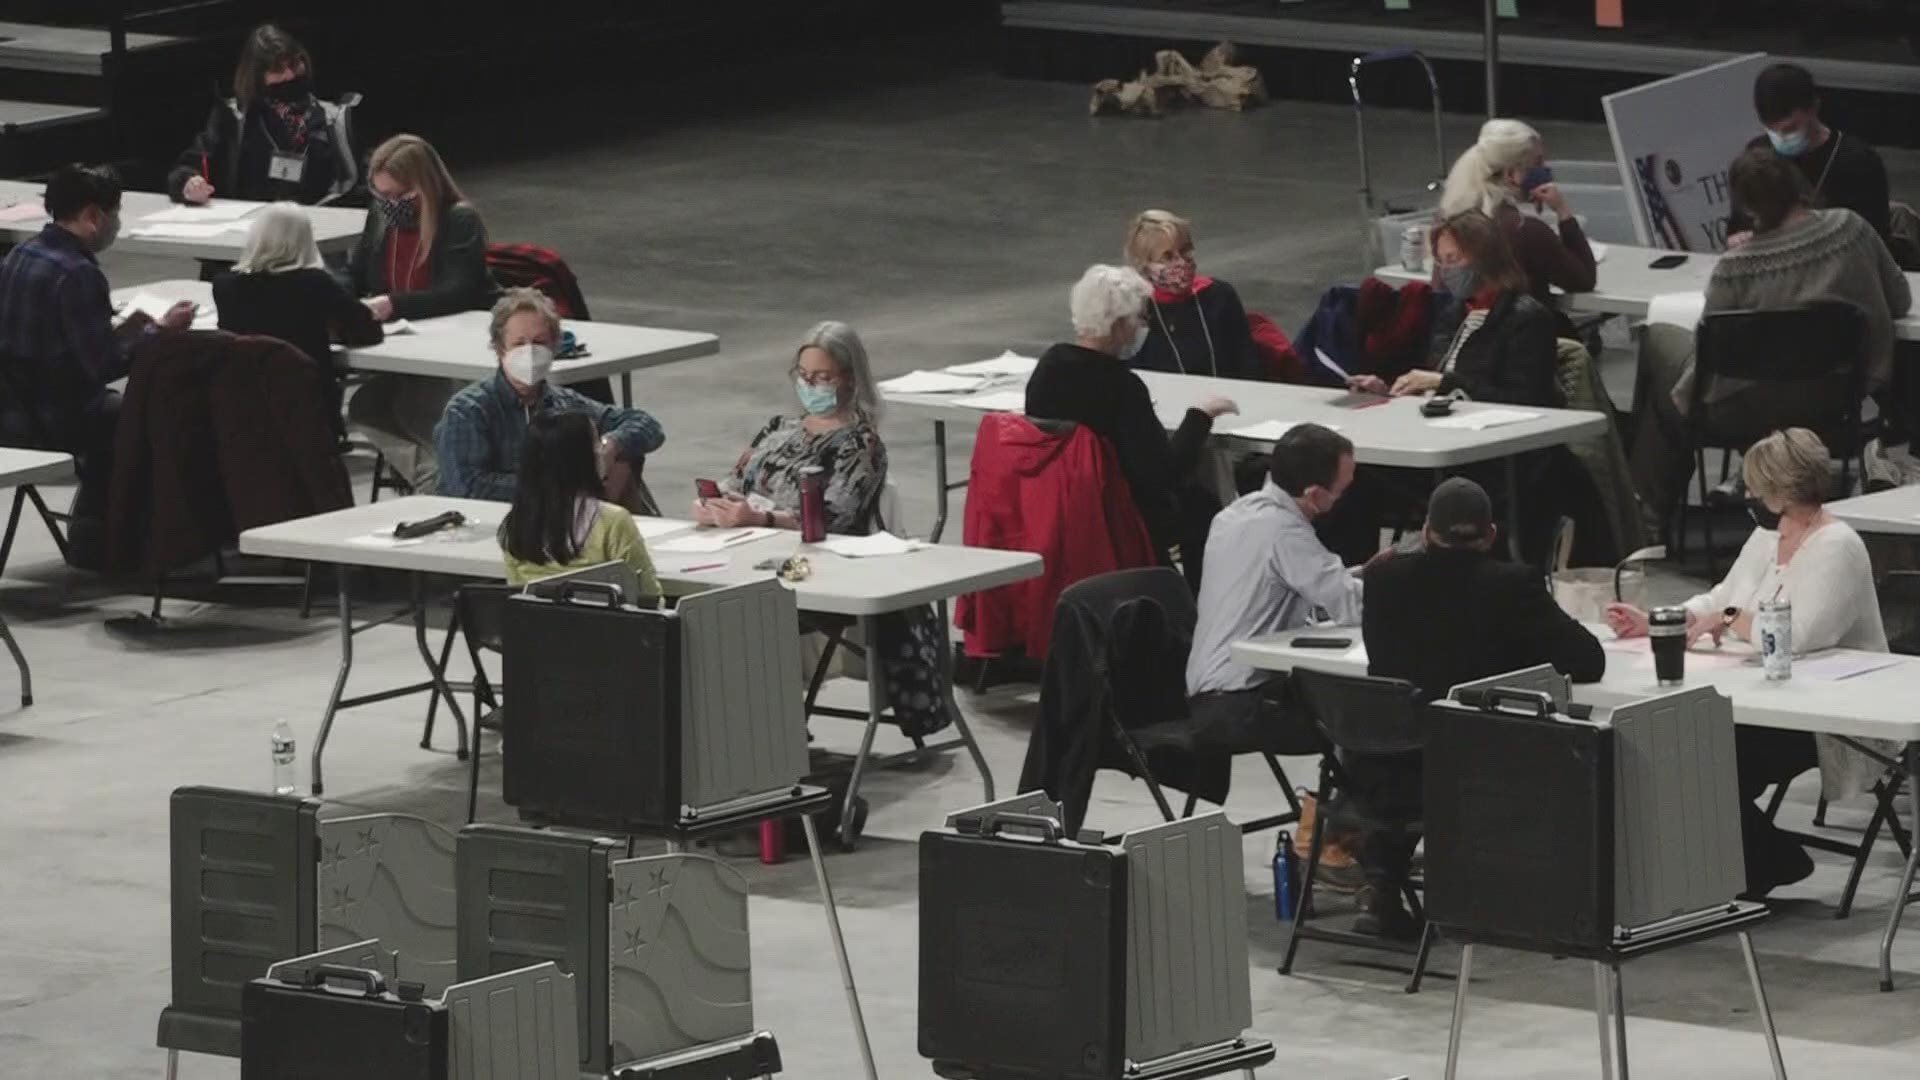 Many of the half-million absentee and early voting ballots are still being counted.